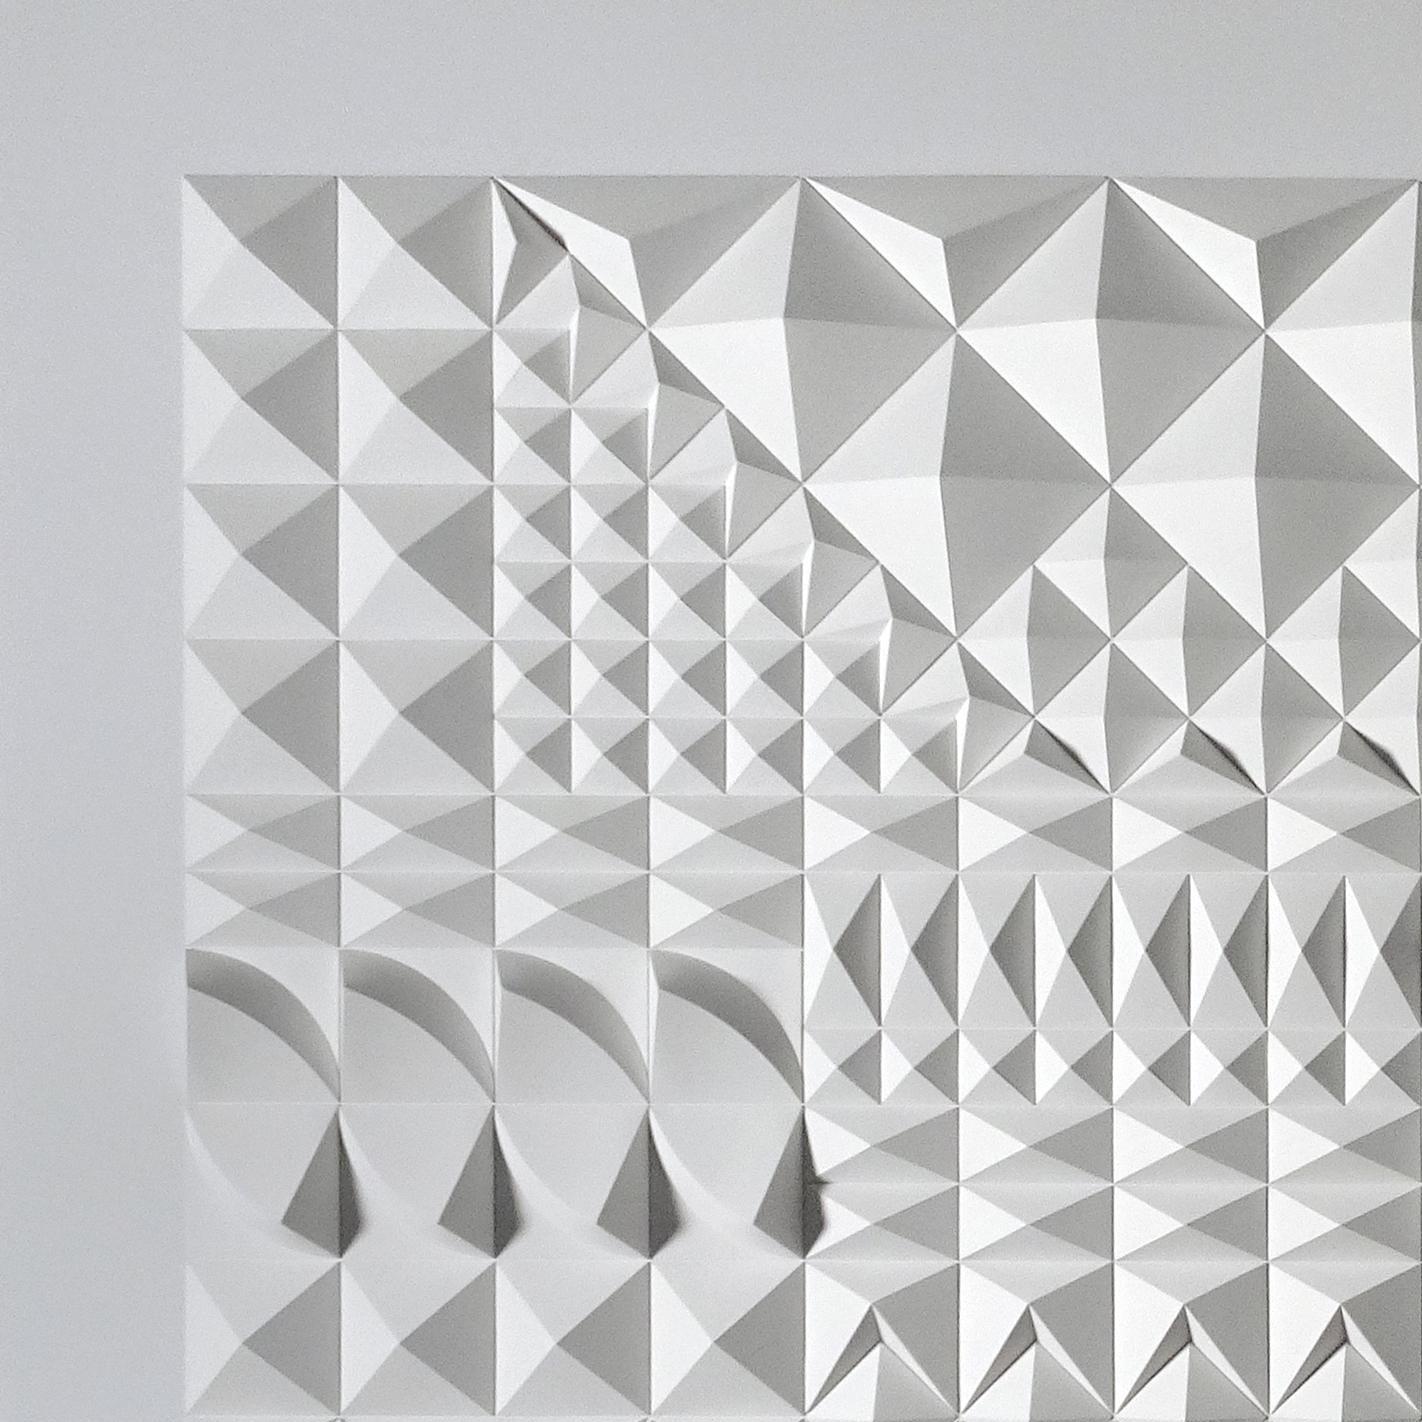 As a paper engineer, Matt Shlian's work is rooted in print media, book arts and commercial design. Beginning with an initial fold, a single action causes a transfer of energy to subsequent folds, which ultimately manifest in drawing and three